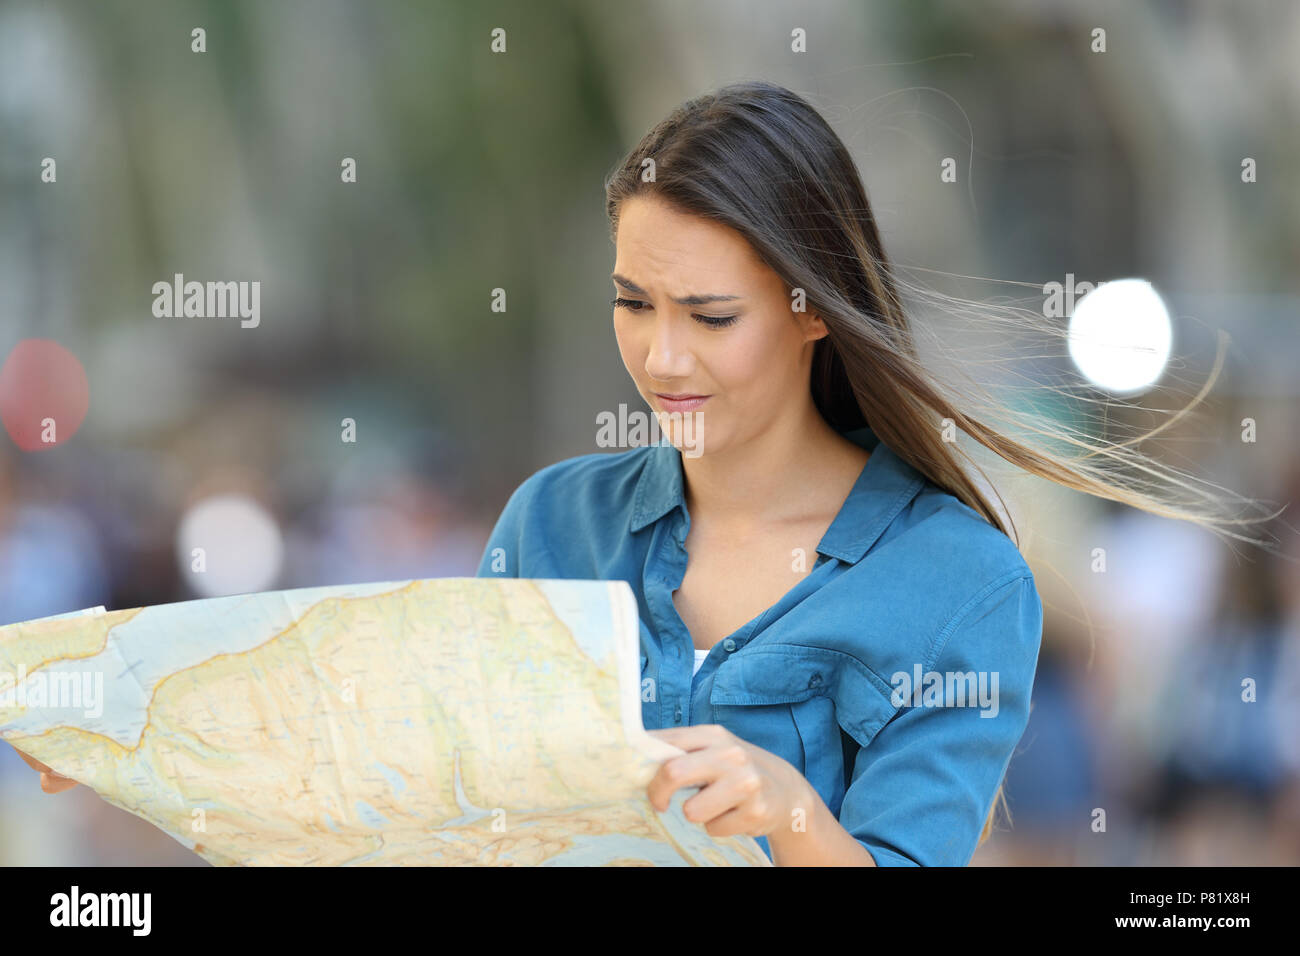 Confused lost tourist reading a map searching location on a city street Stock Photo